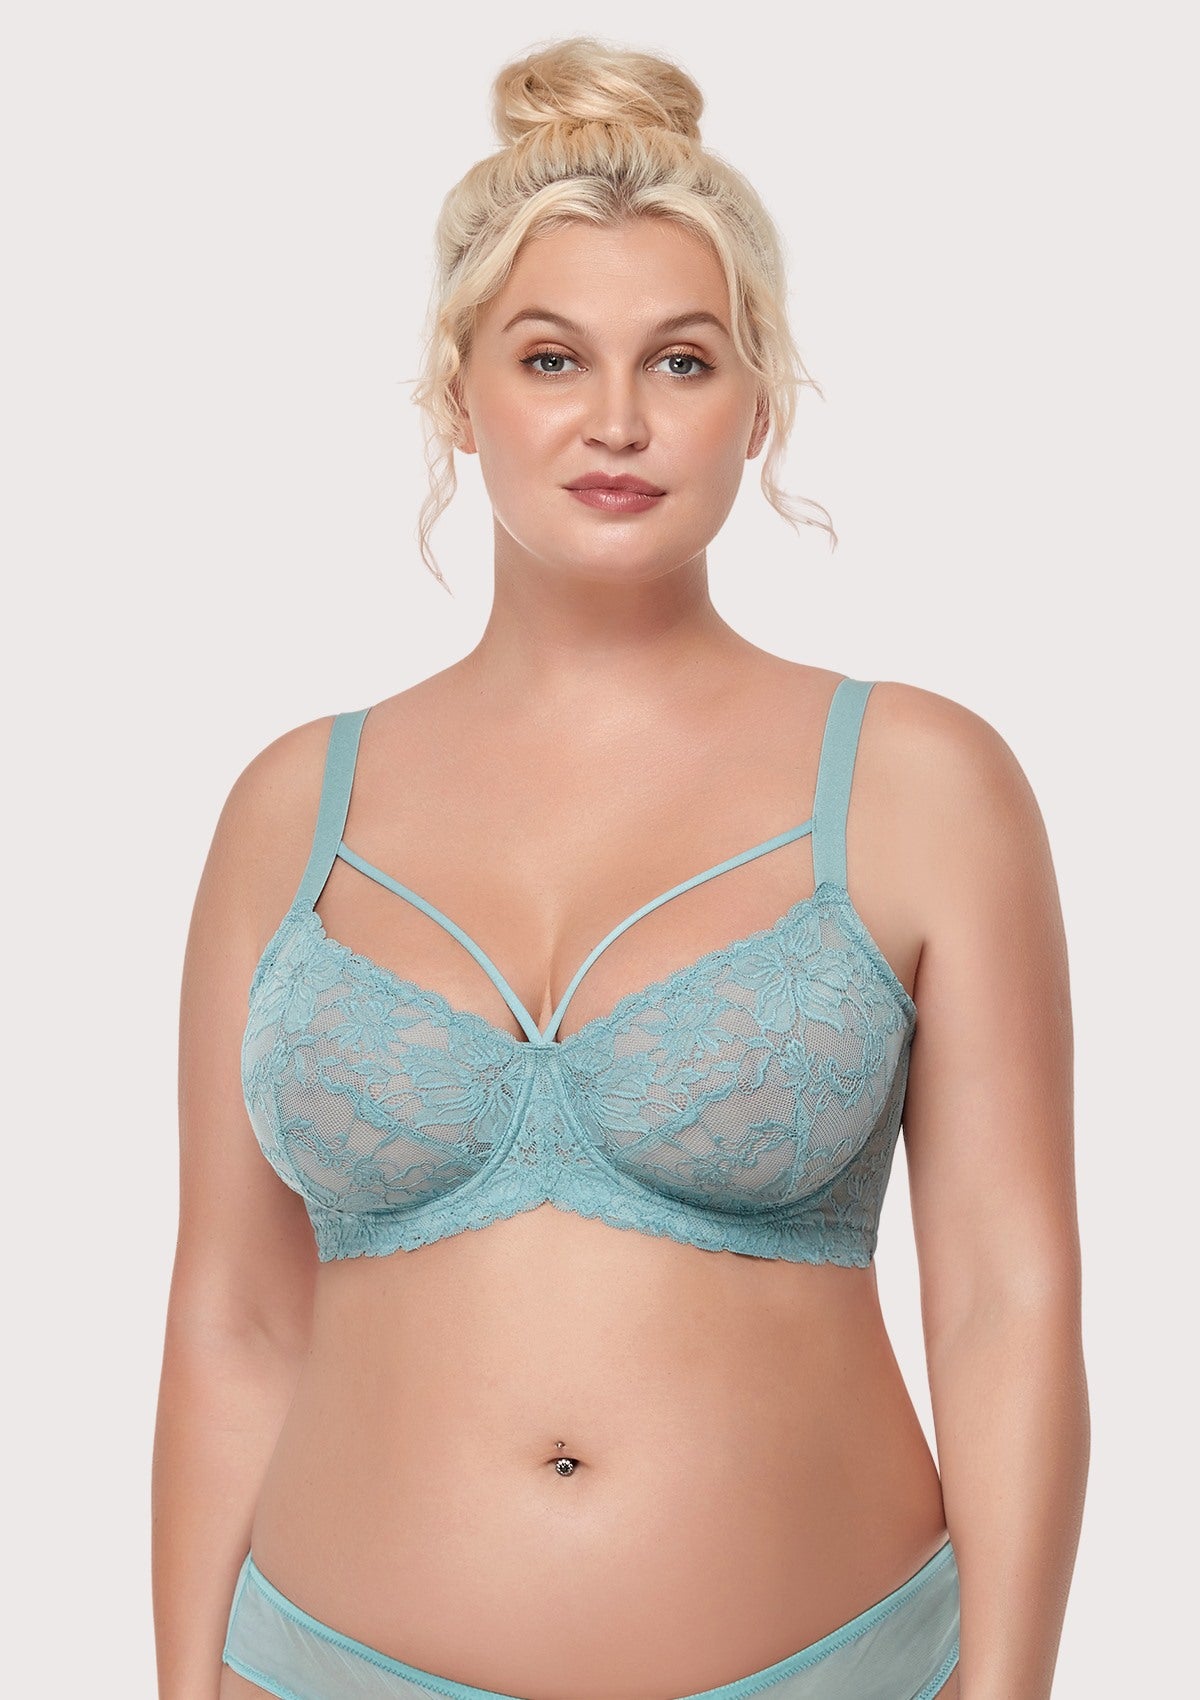 HSIA Pretty In Petals Unlined Lace Bra: Comfortable And Supportive Bra - Pewter Blue / 40 / D